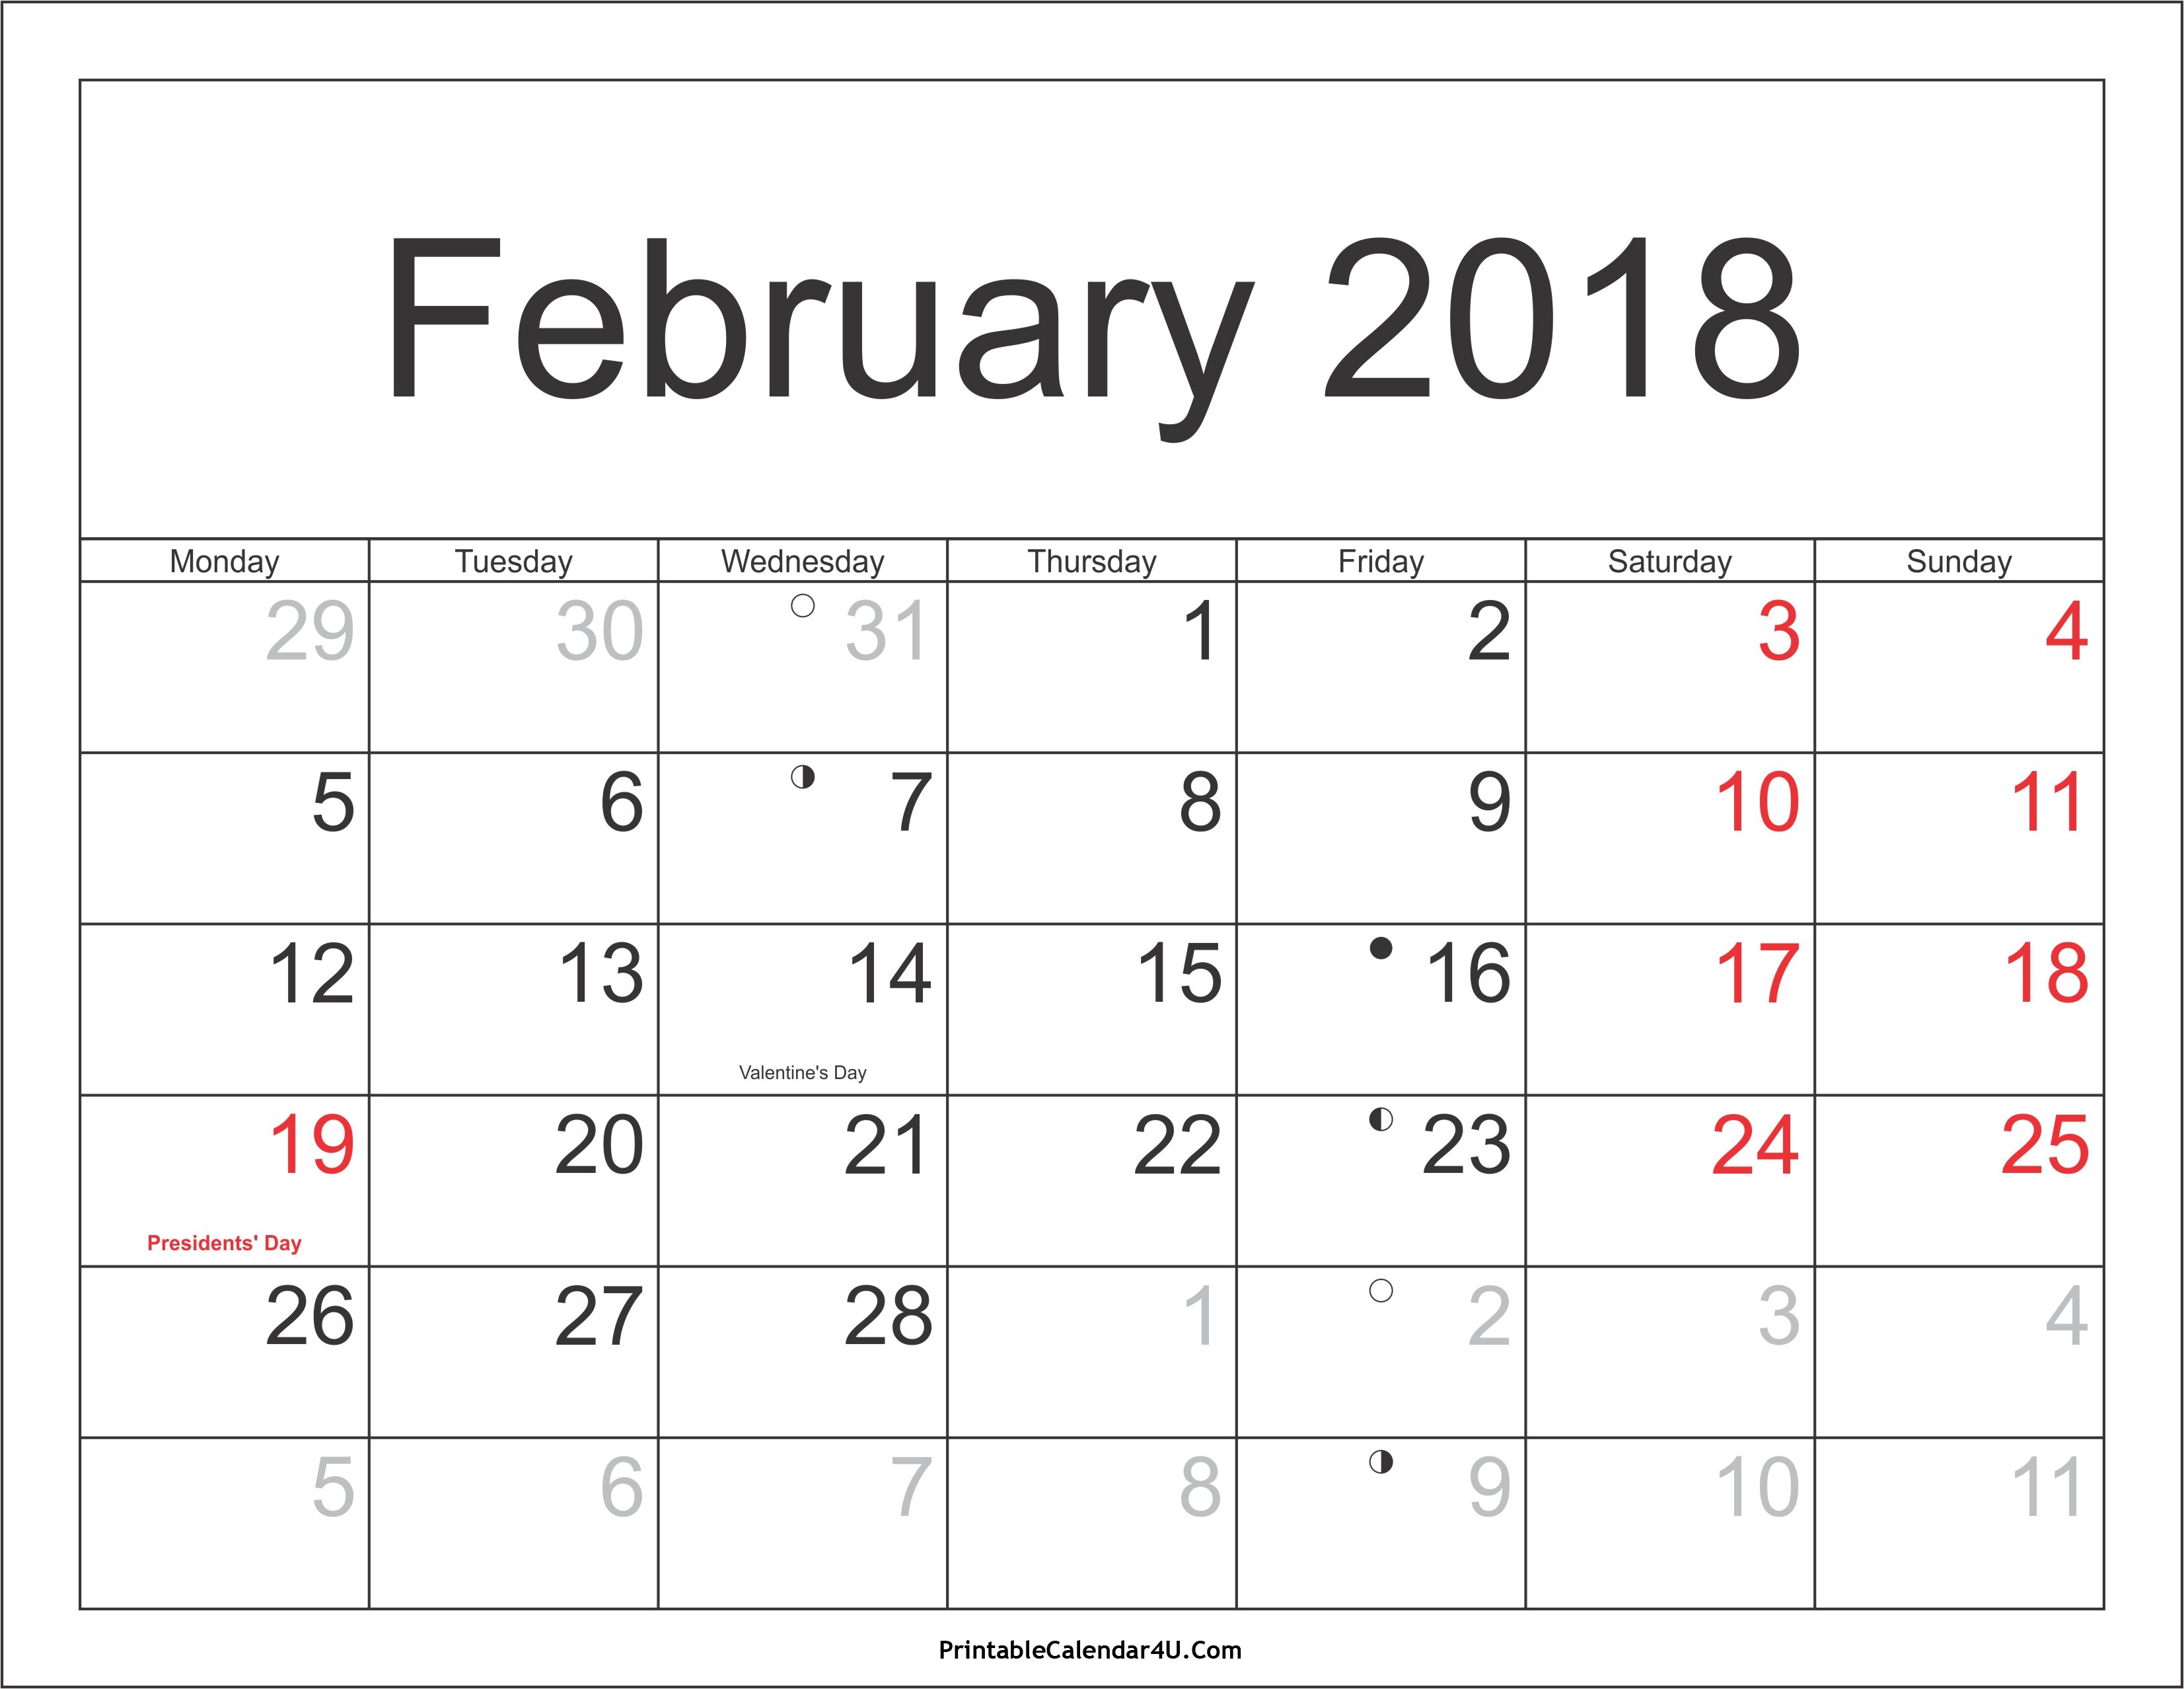 February 2018 Calendar With Holidays | Monthly Printable Calendar throughout February 2018 Calendar With Holidays